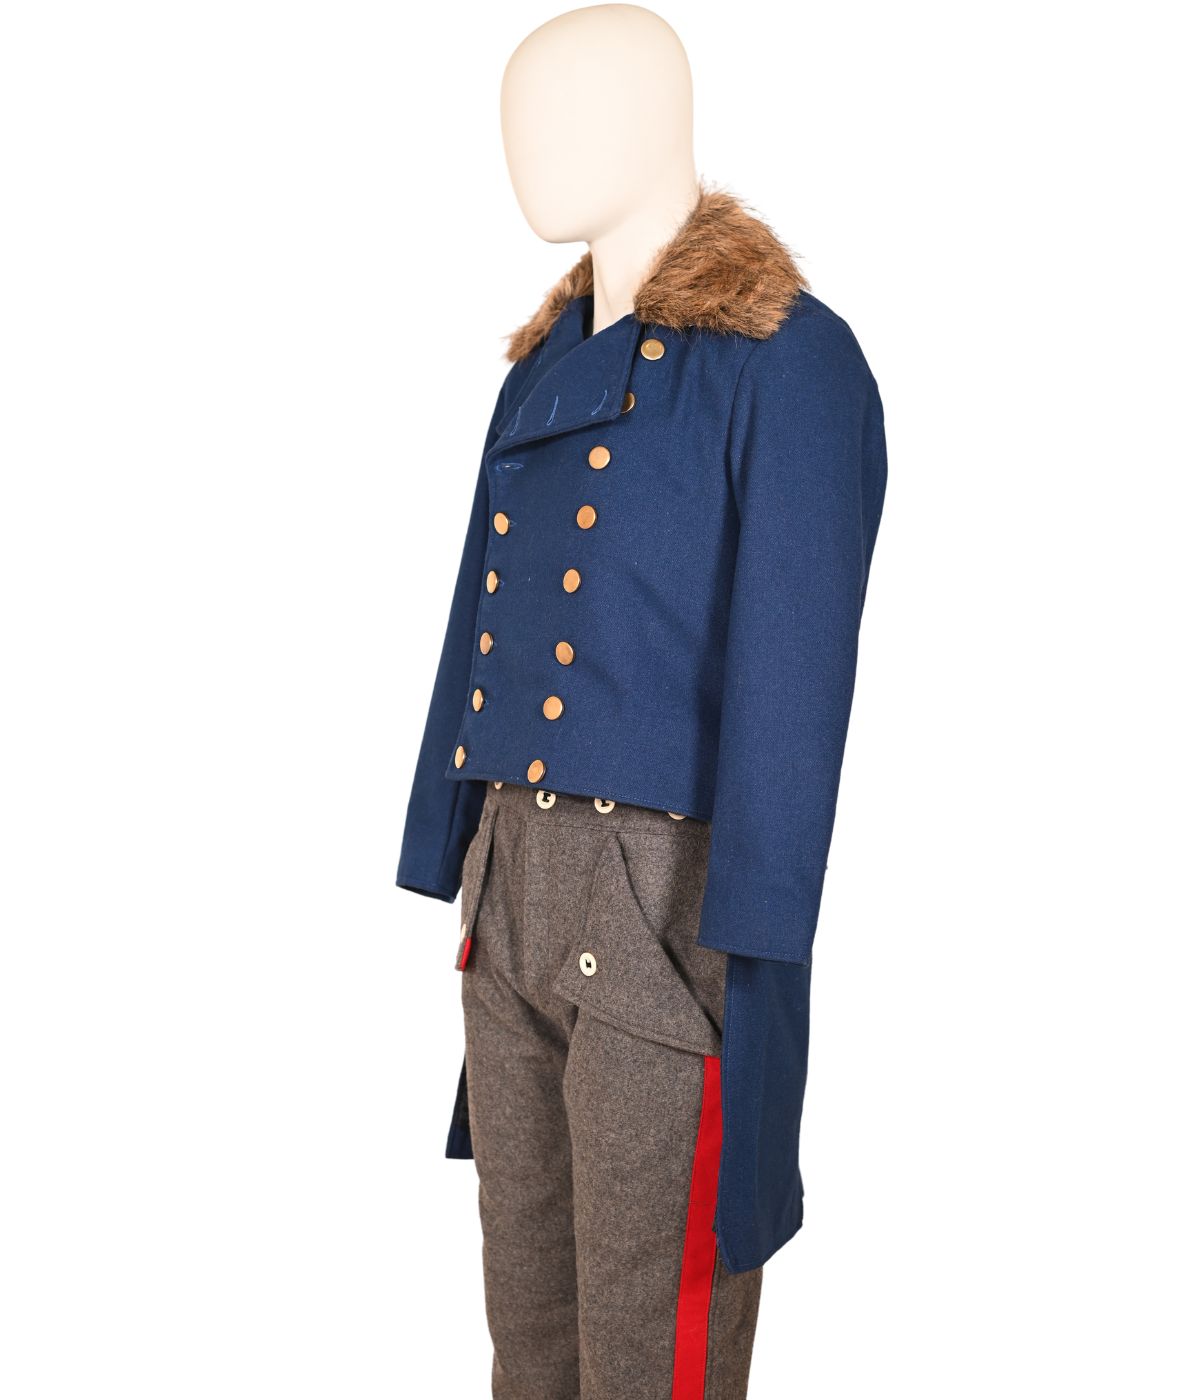 18th century men's blue tailcoat with long sleeves